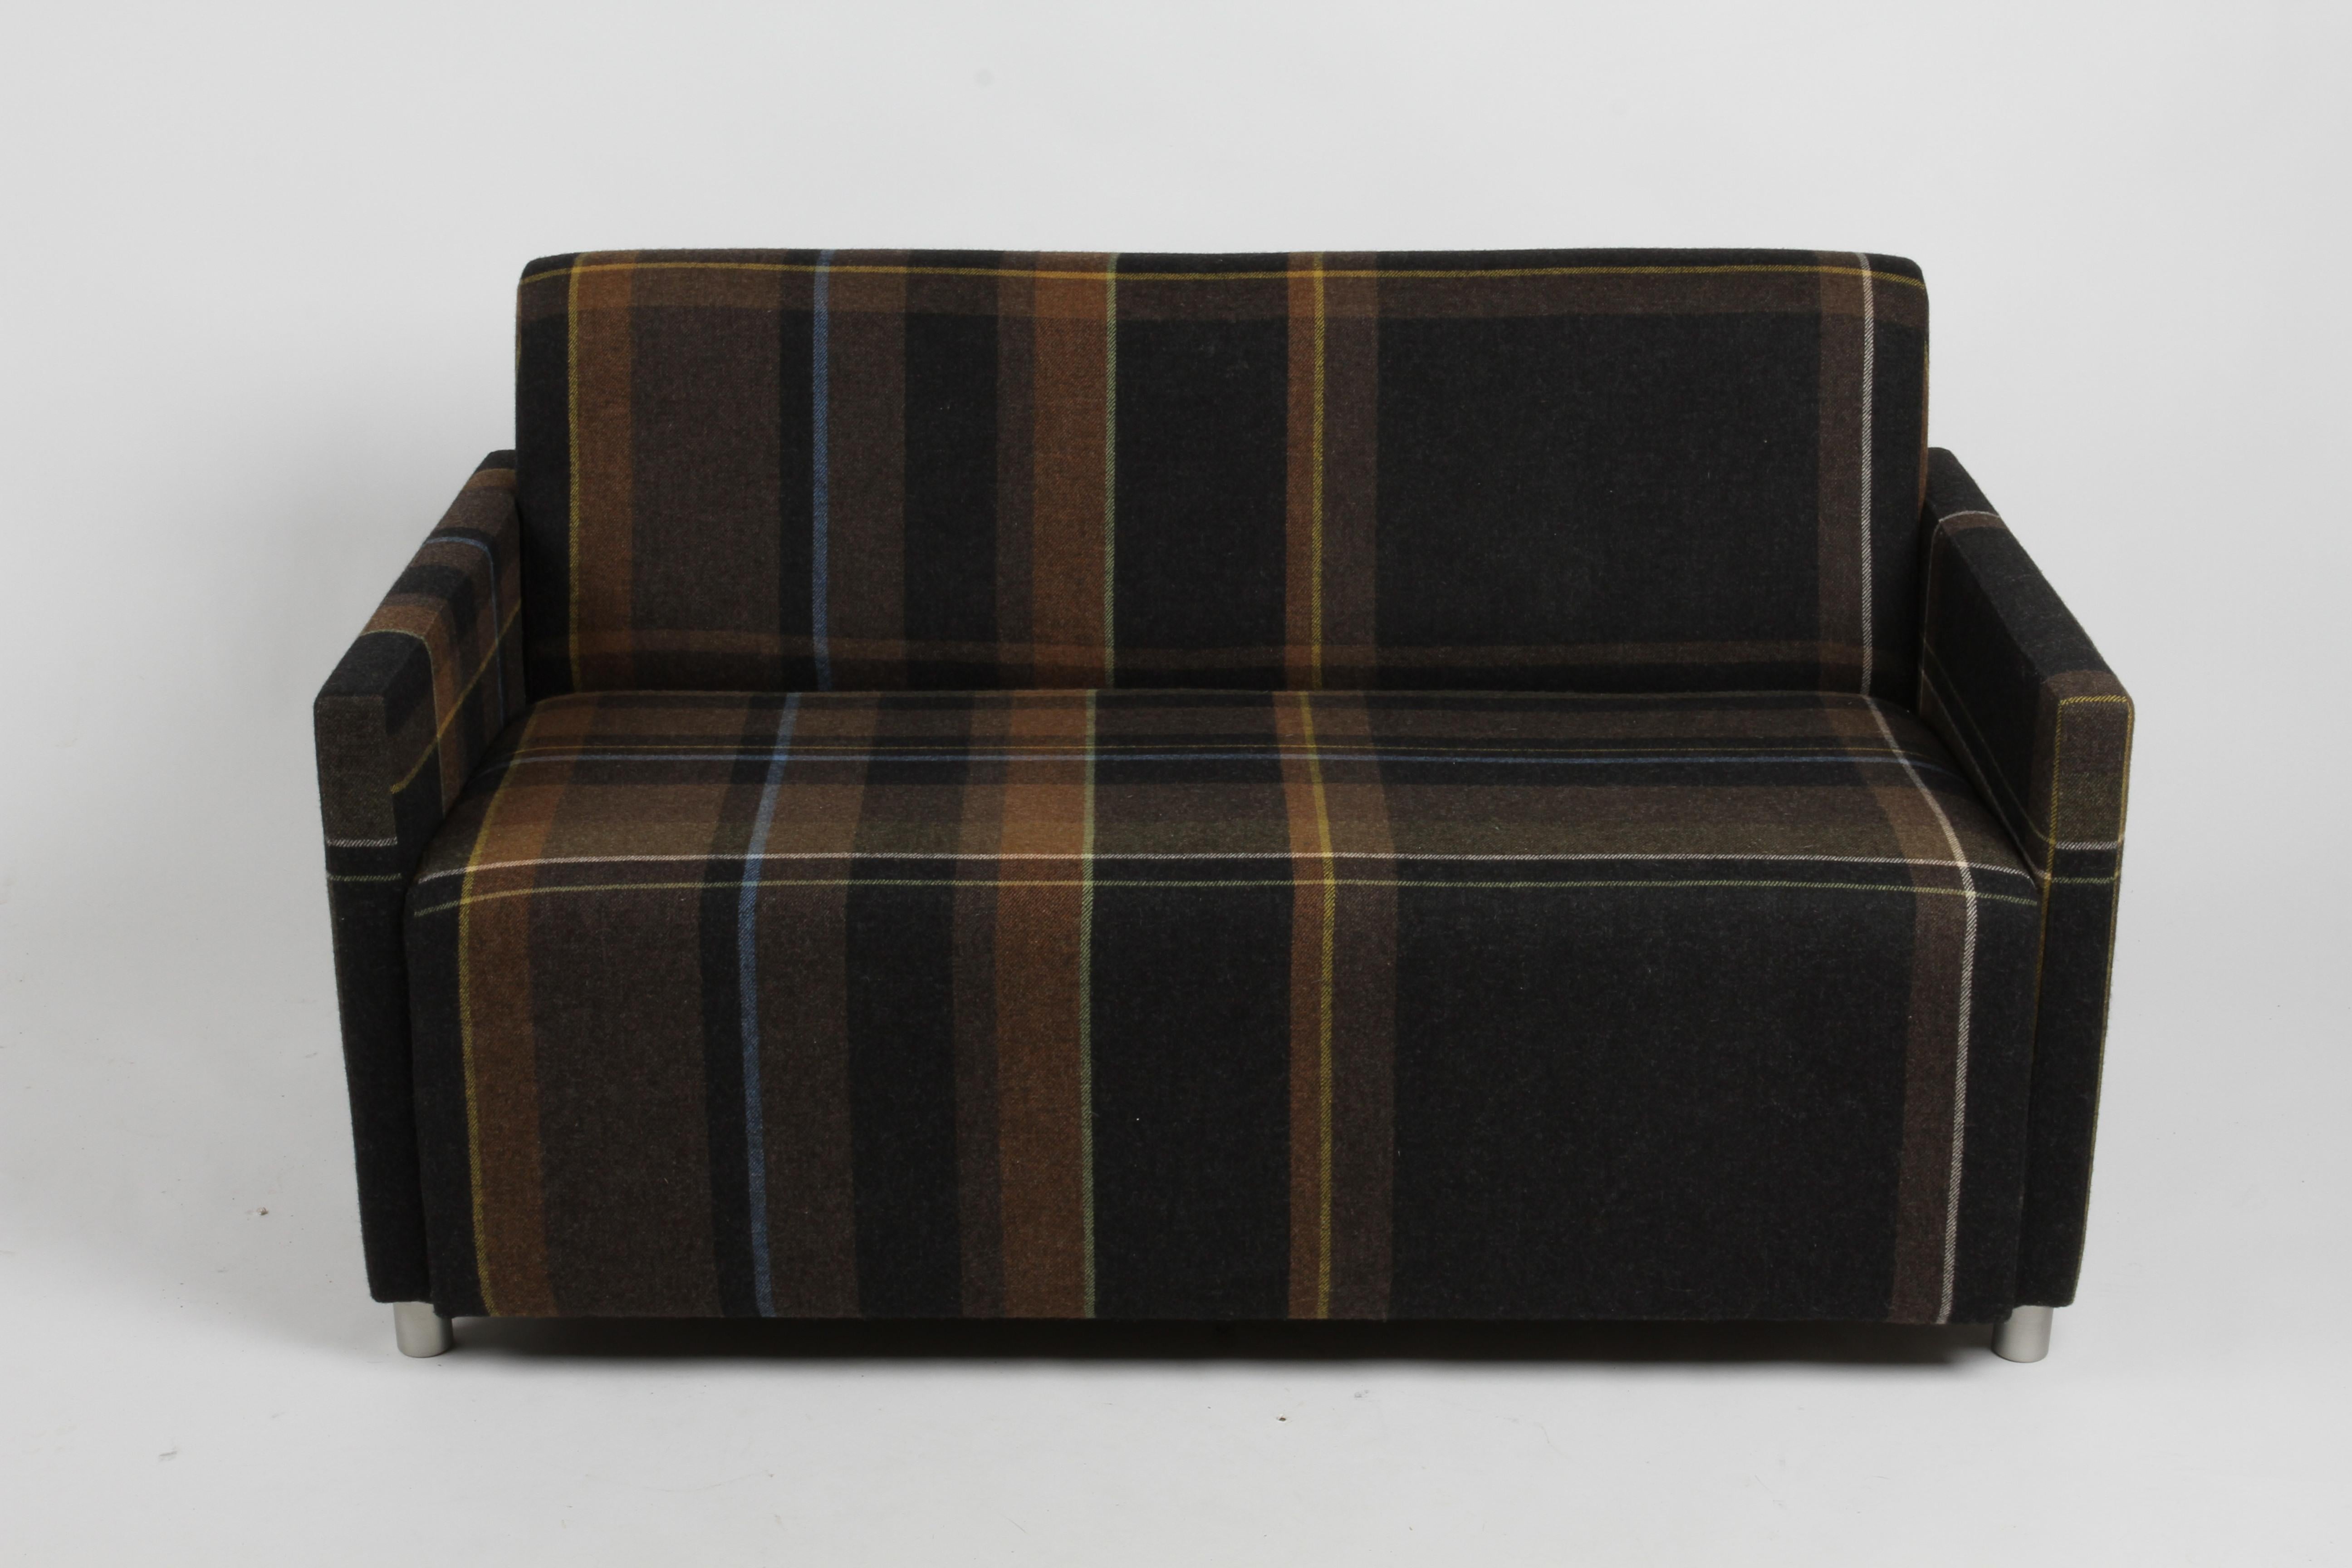 Contemporary loveseat or settee with sleek lines on round metal legs, this Coupe Tuxedo sofa designed Dennie Pimental and John Duffy for Coalesse. Beautifully upholstered in Paul Smith by Maharam UK, the exaggerated Plaid pattern, 100% wool,